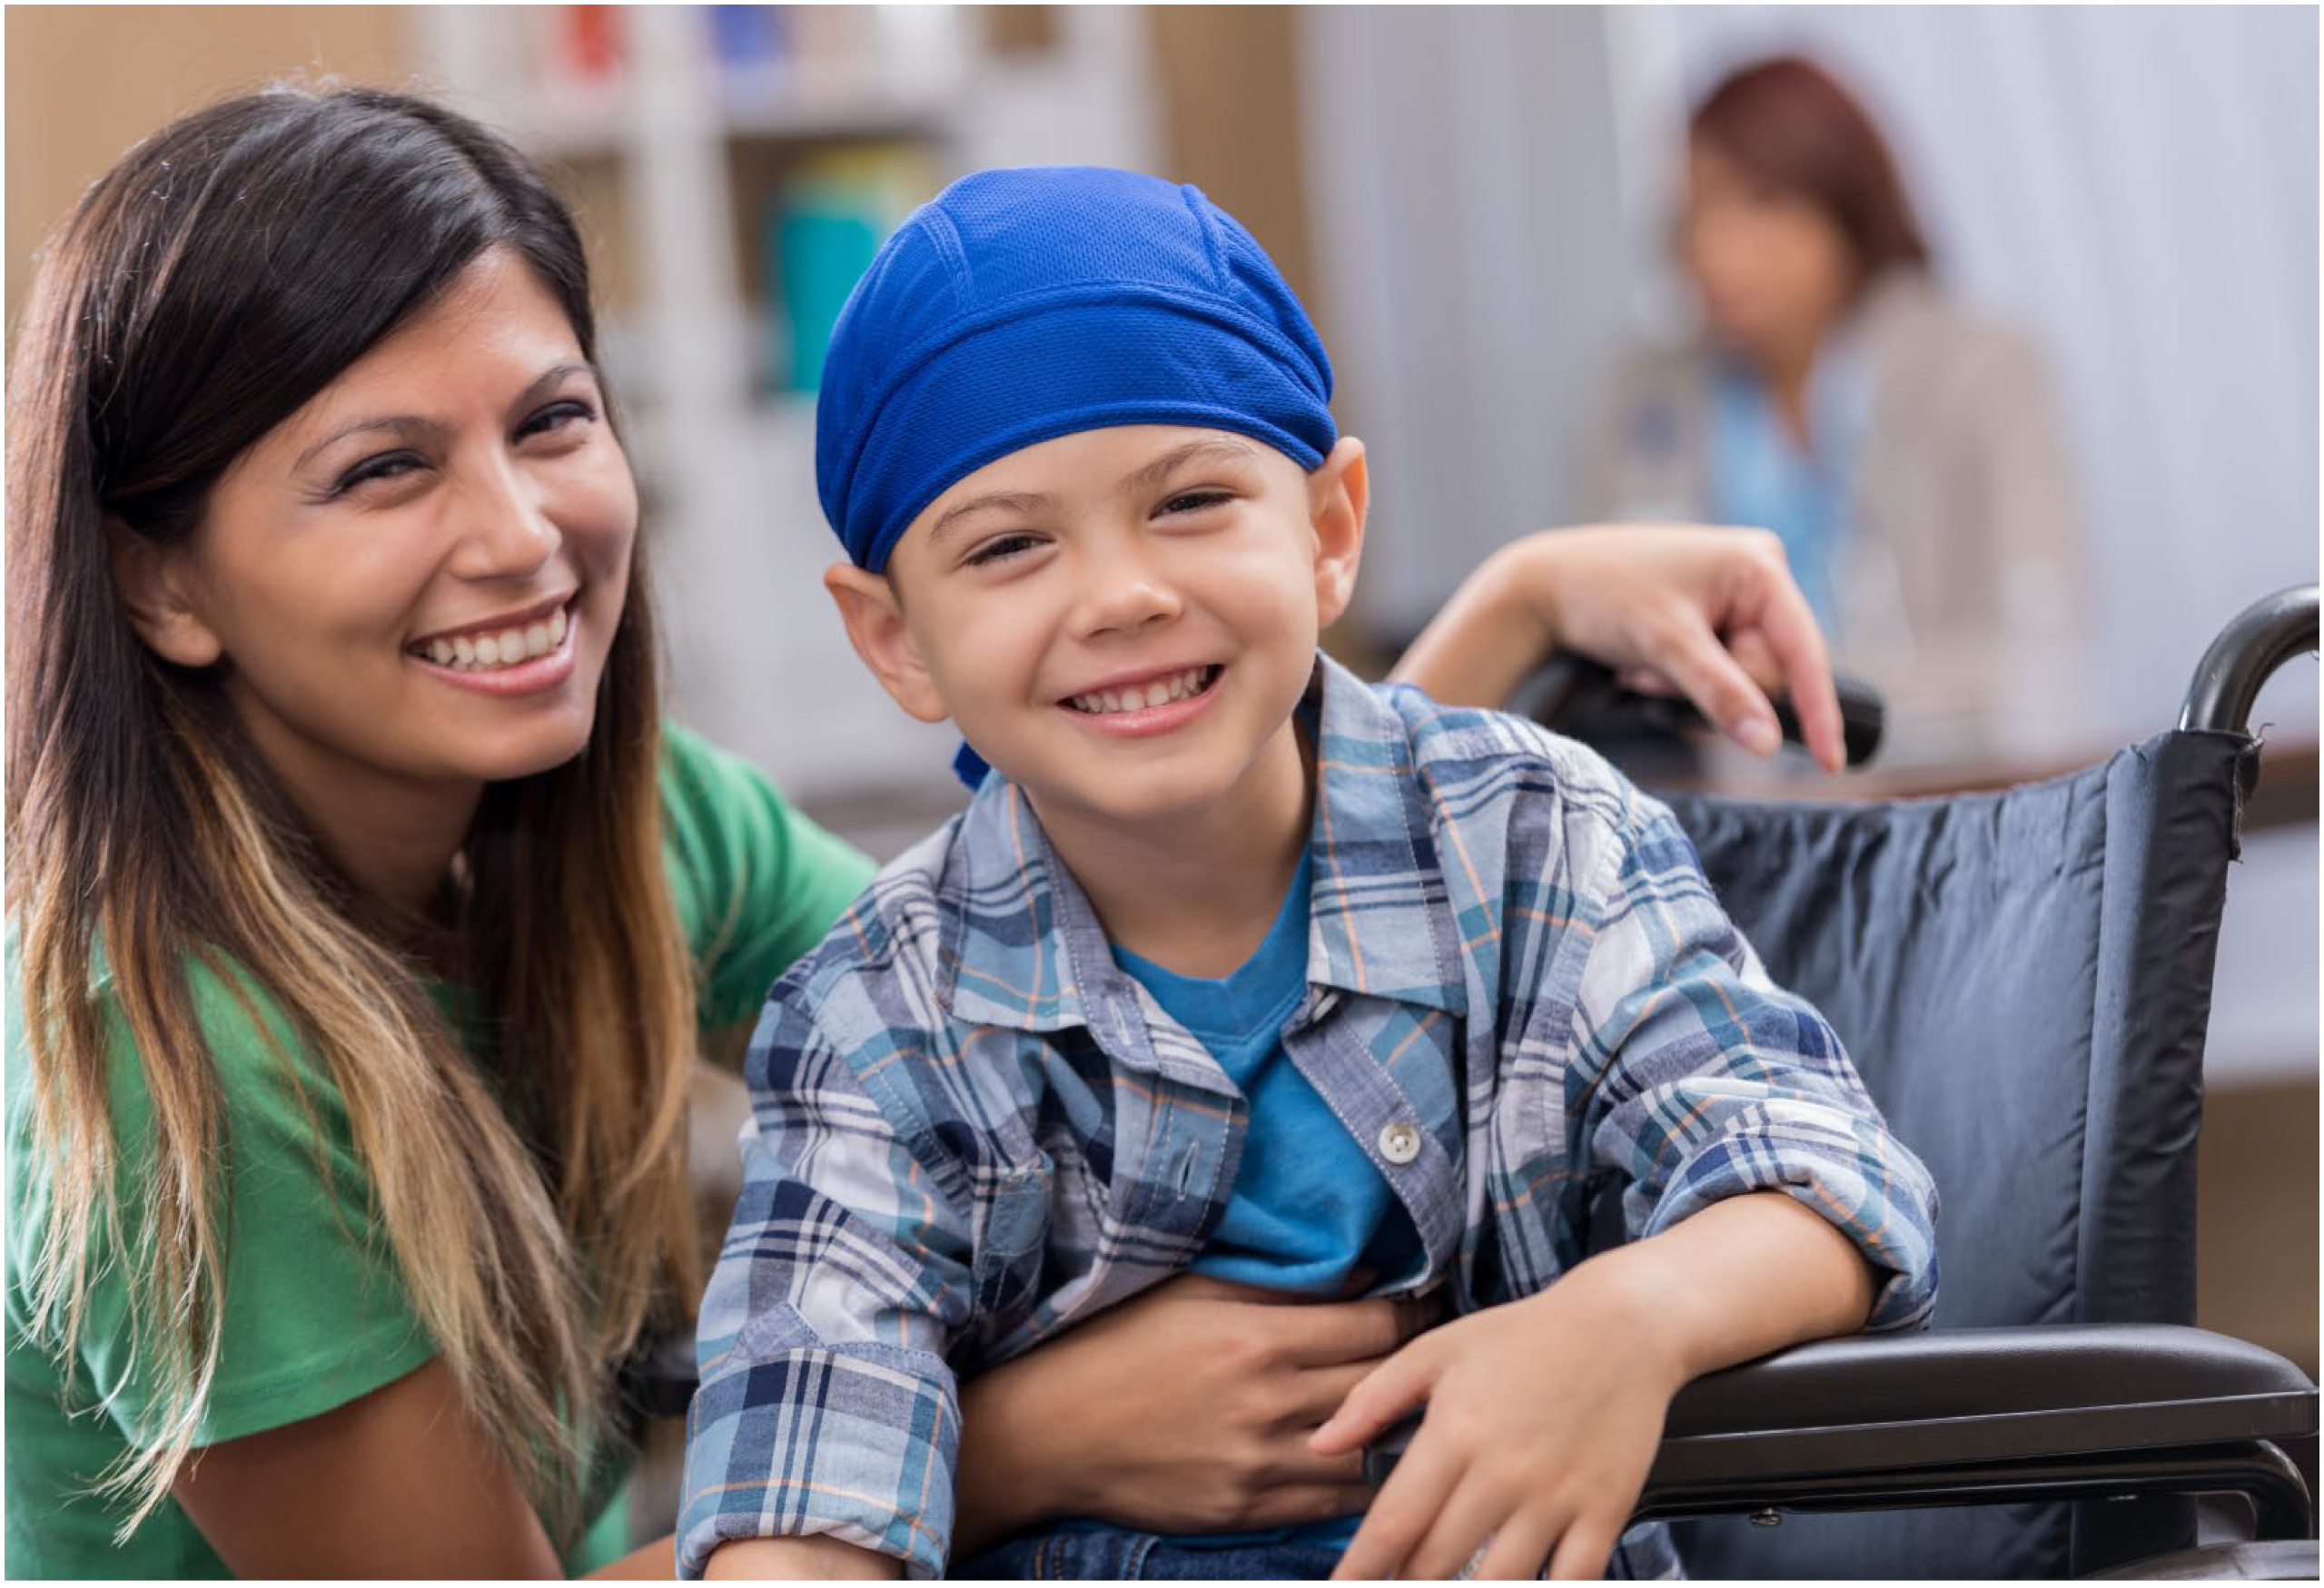 Clinic helps childhood cancer survivors, families deal with many posttreatment challenges